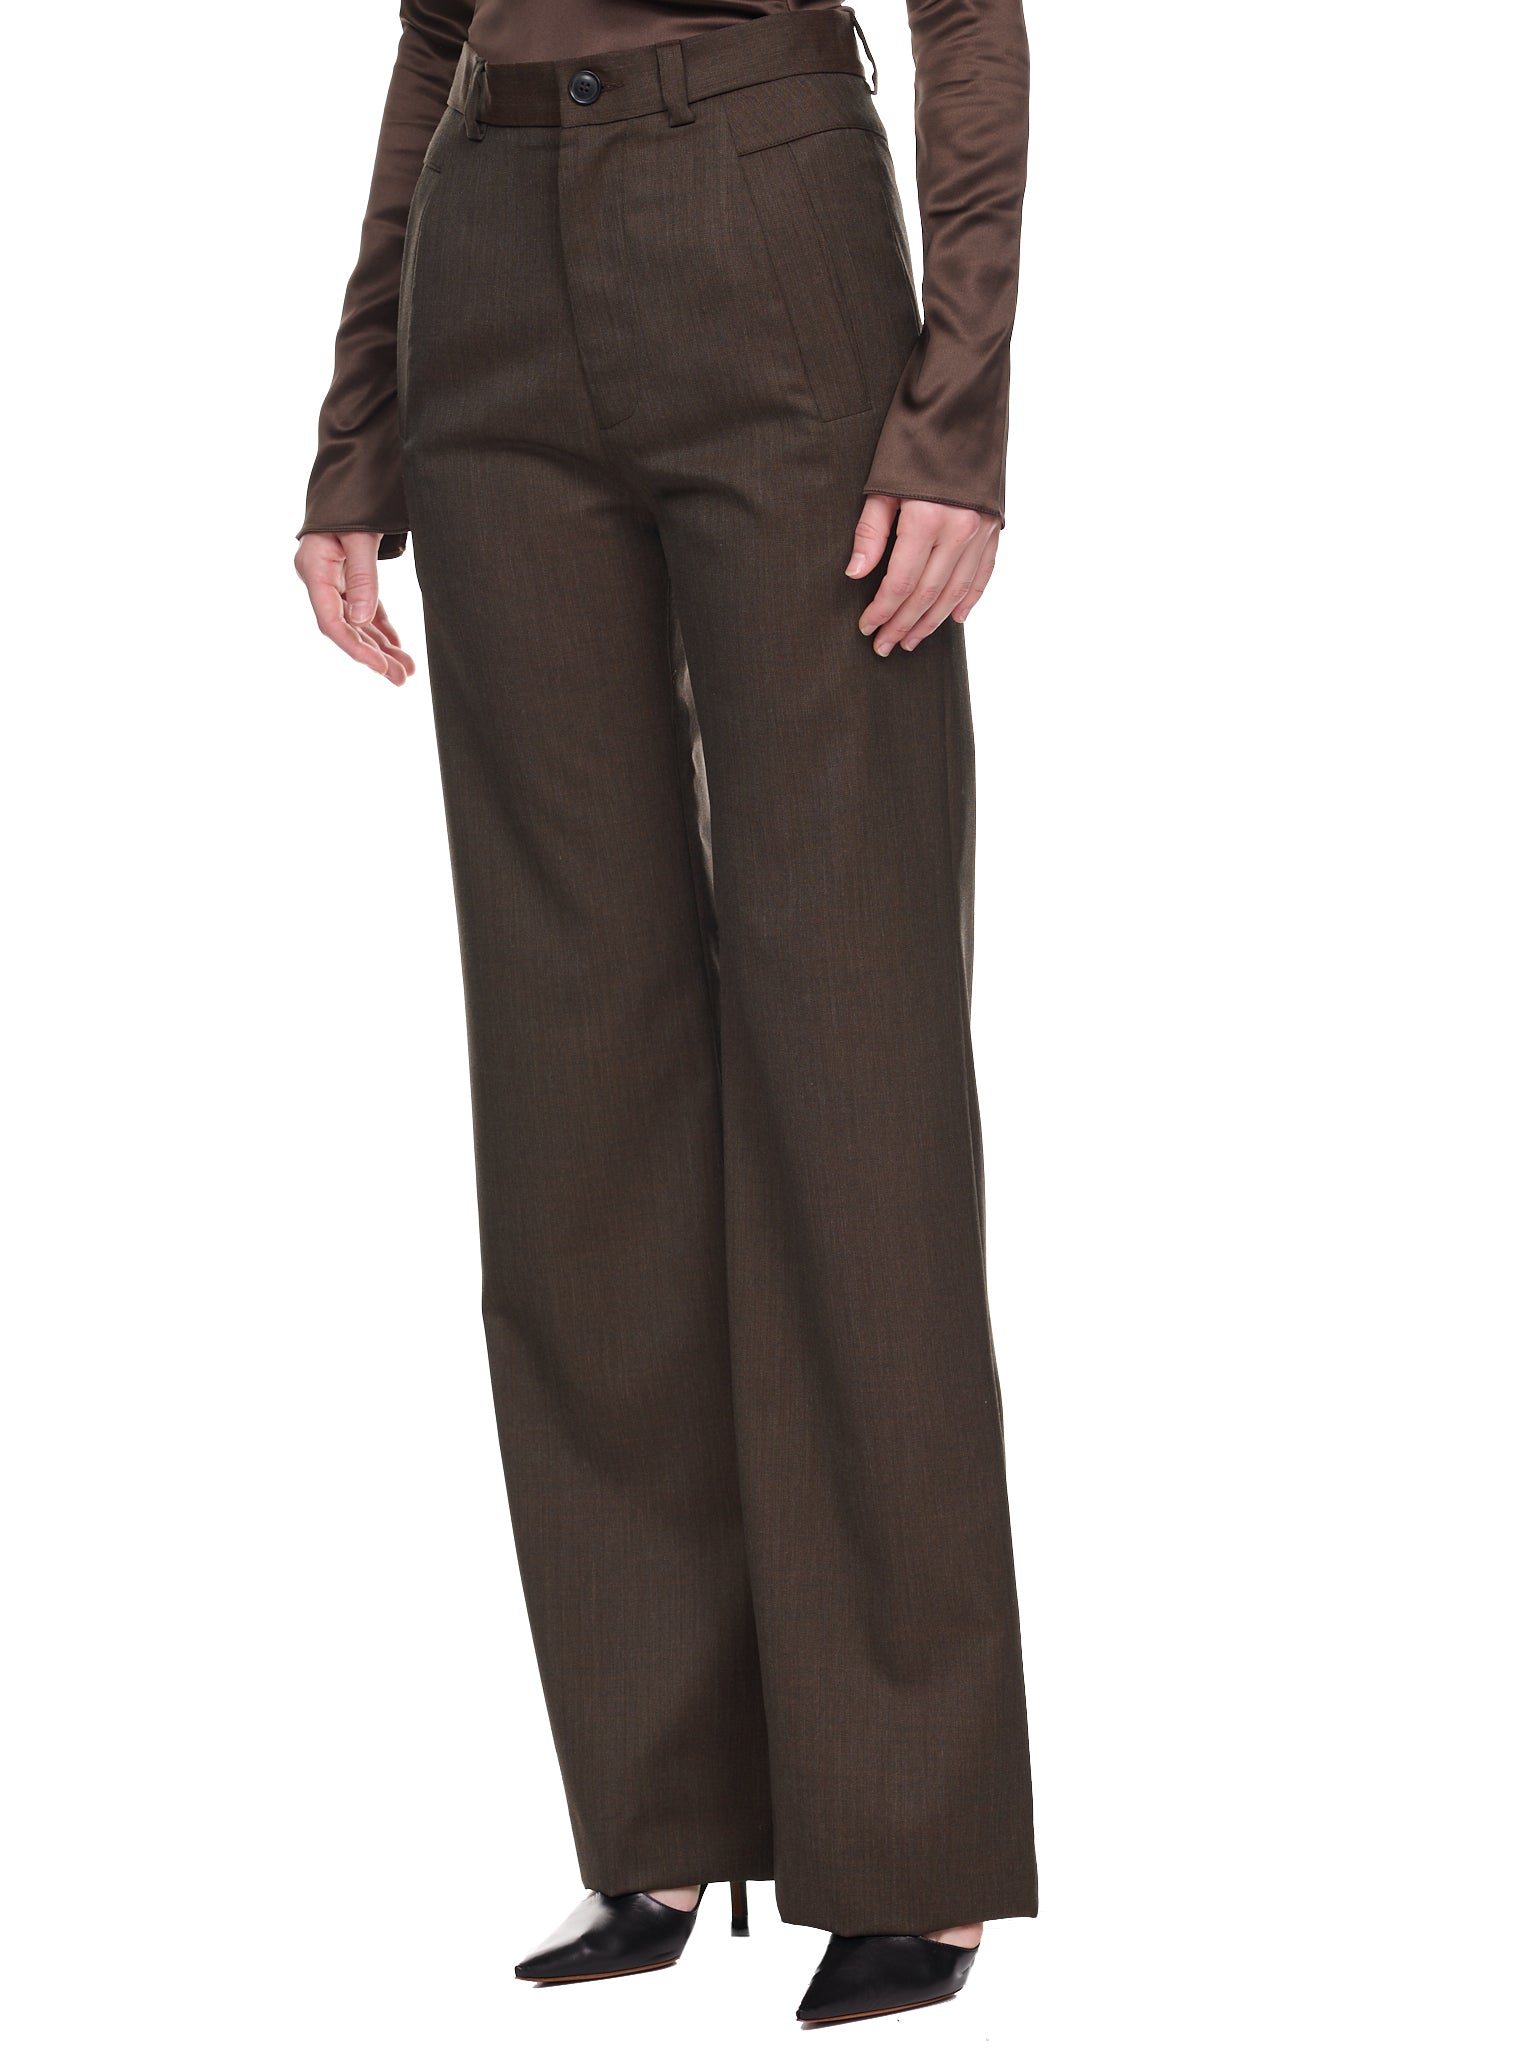 Vivienne Westwood Tailored Trousers | H.Lorenzo - side